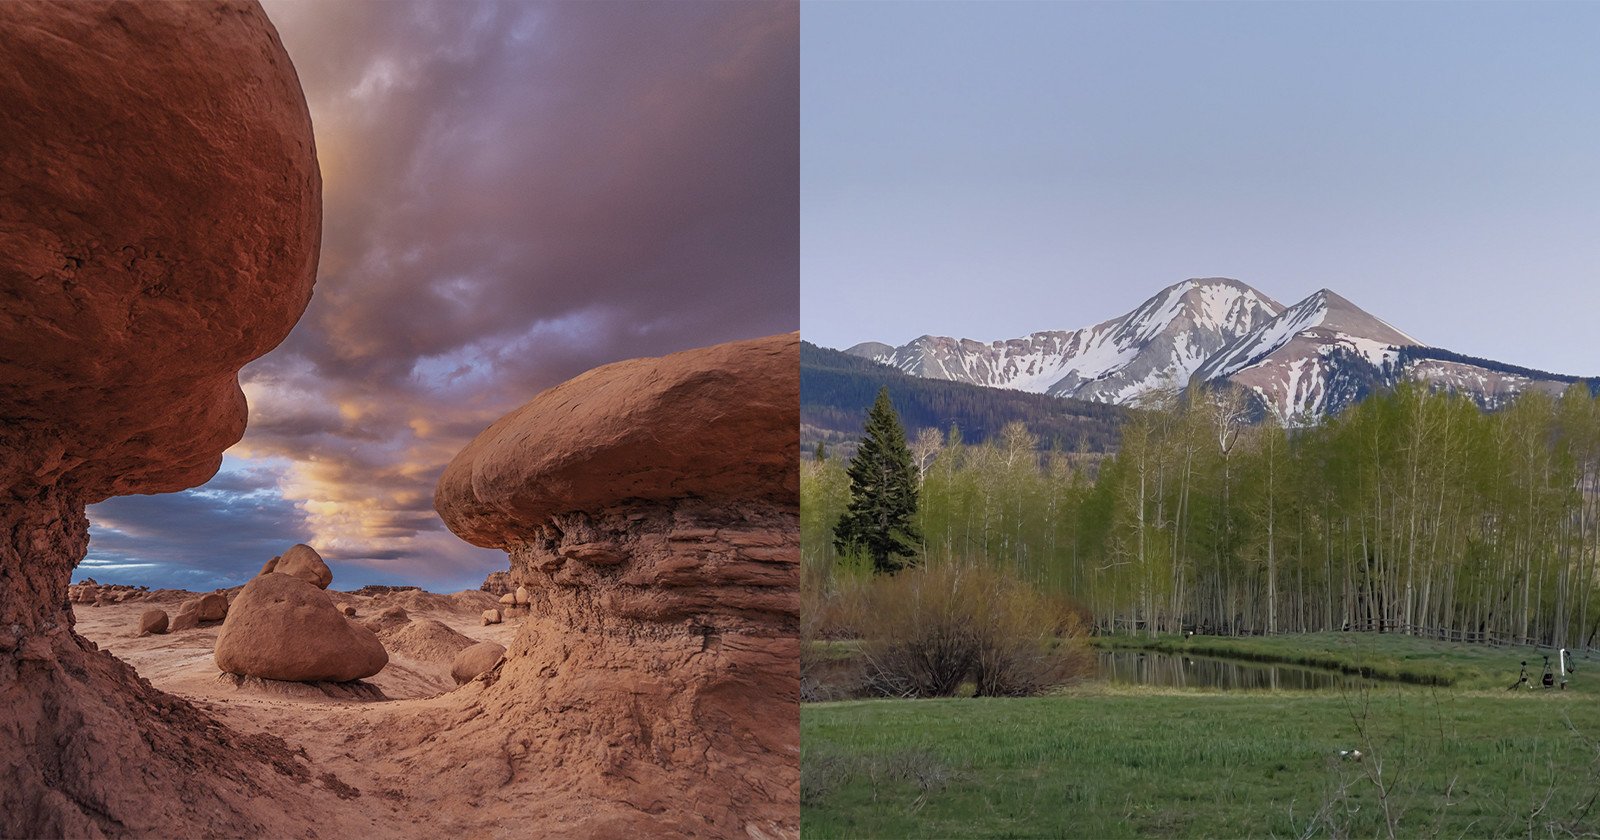  gorgeous timelapse film shows rugged beauty around 